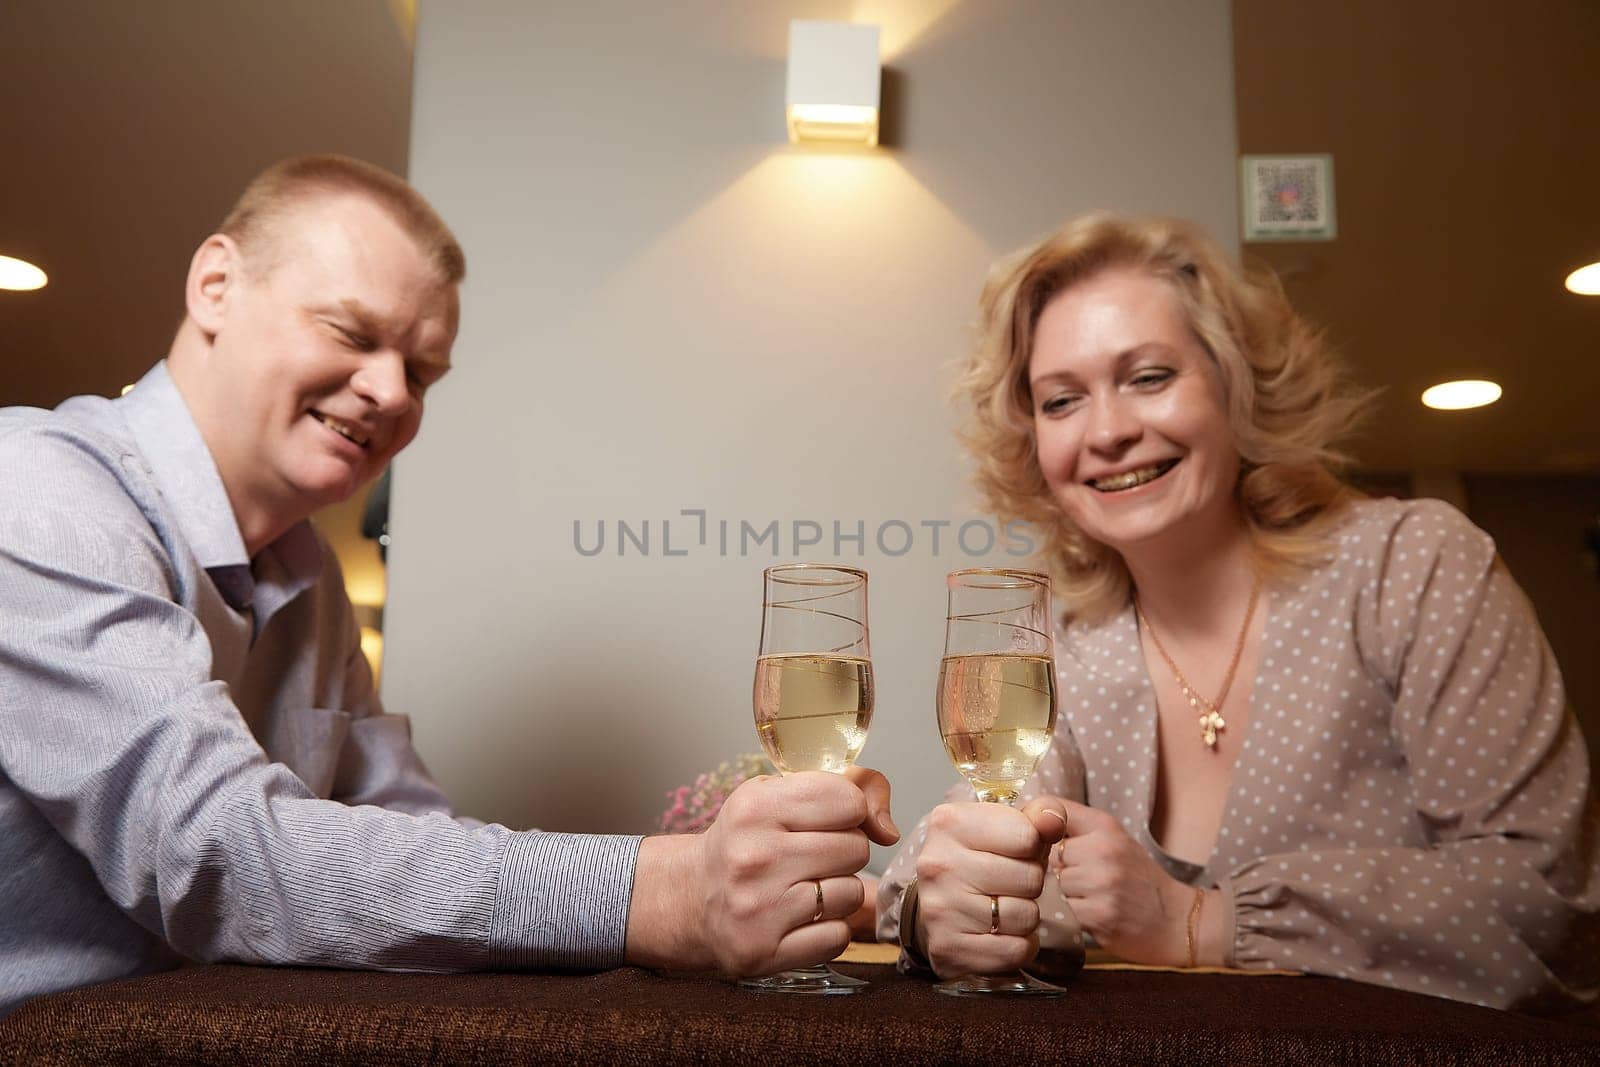 An adult couple drinks wine or champagne in an intimate setting inside of the room or restaurant. A man and woman on an evening date. Family and love